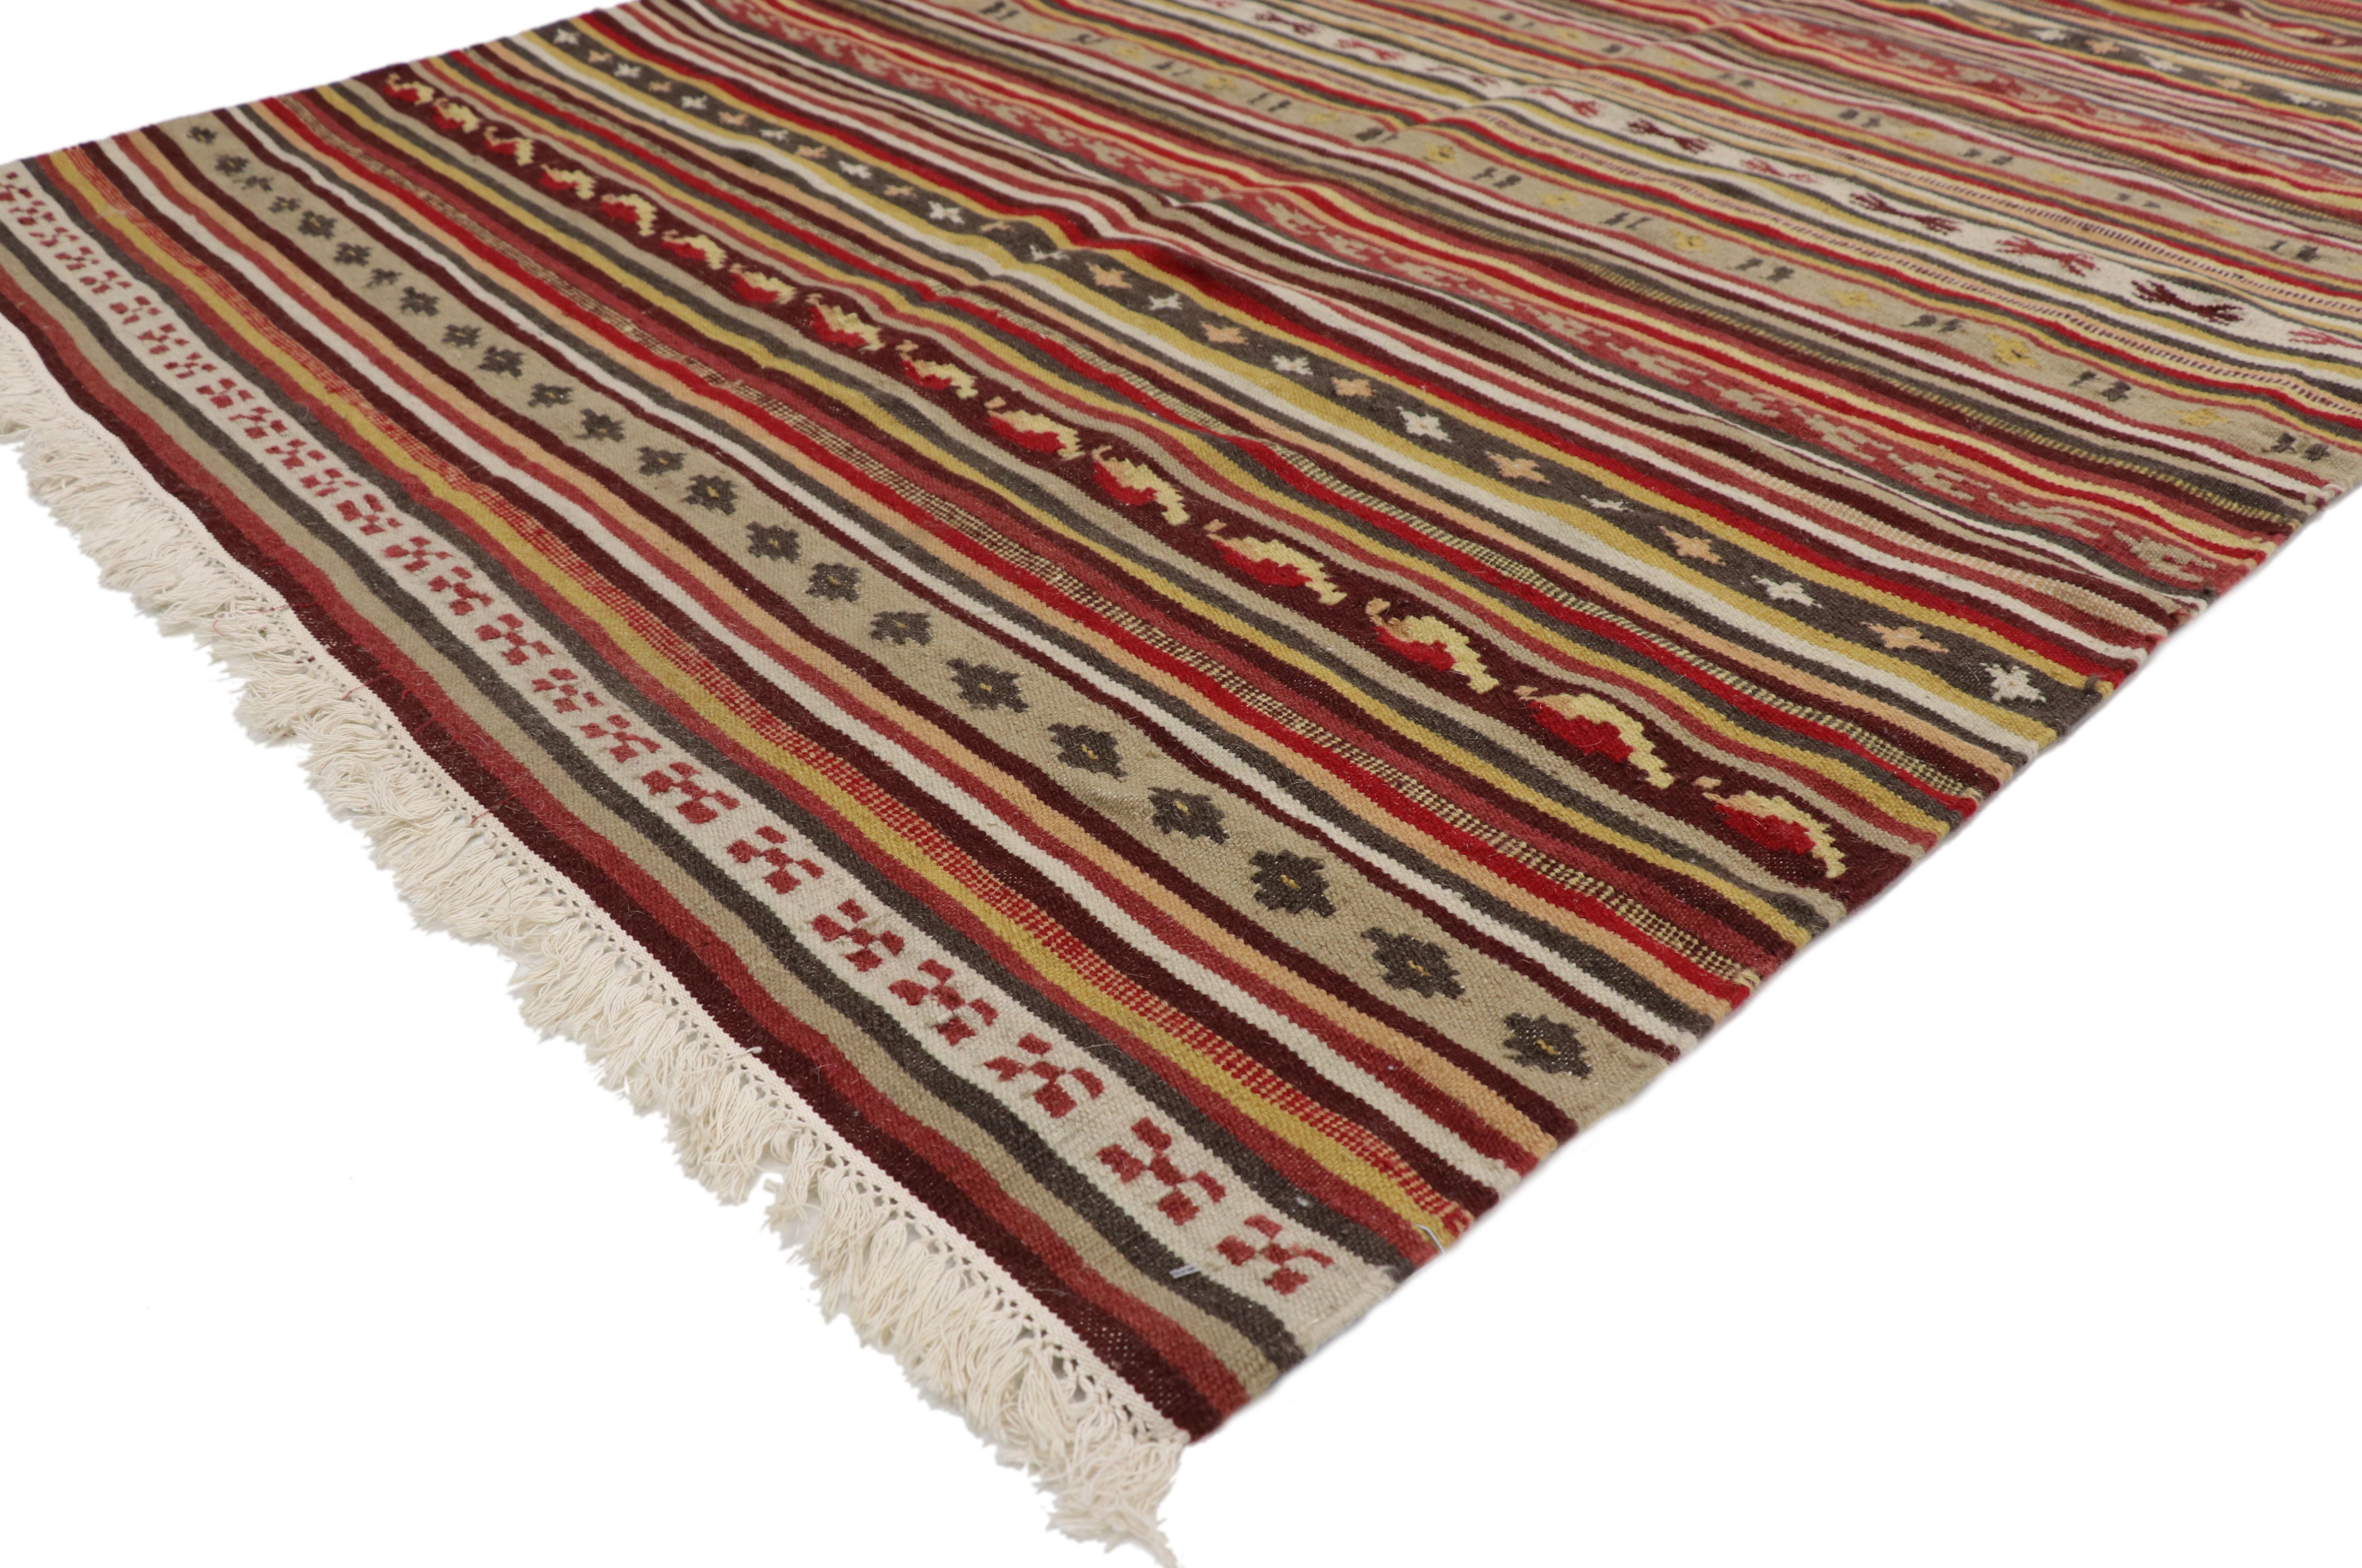 Hand-Woven Vintage Turkish Striped Kilim Rug with Tribal Style, Flat-Weave Rug with Stripes For Sale